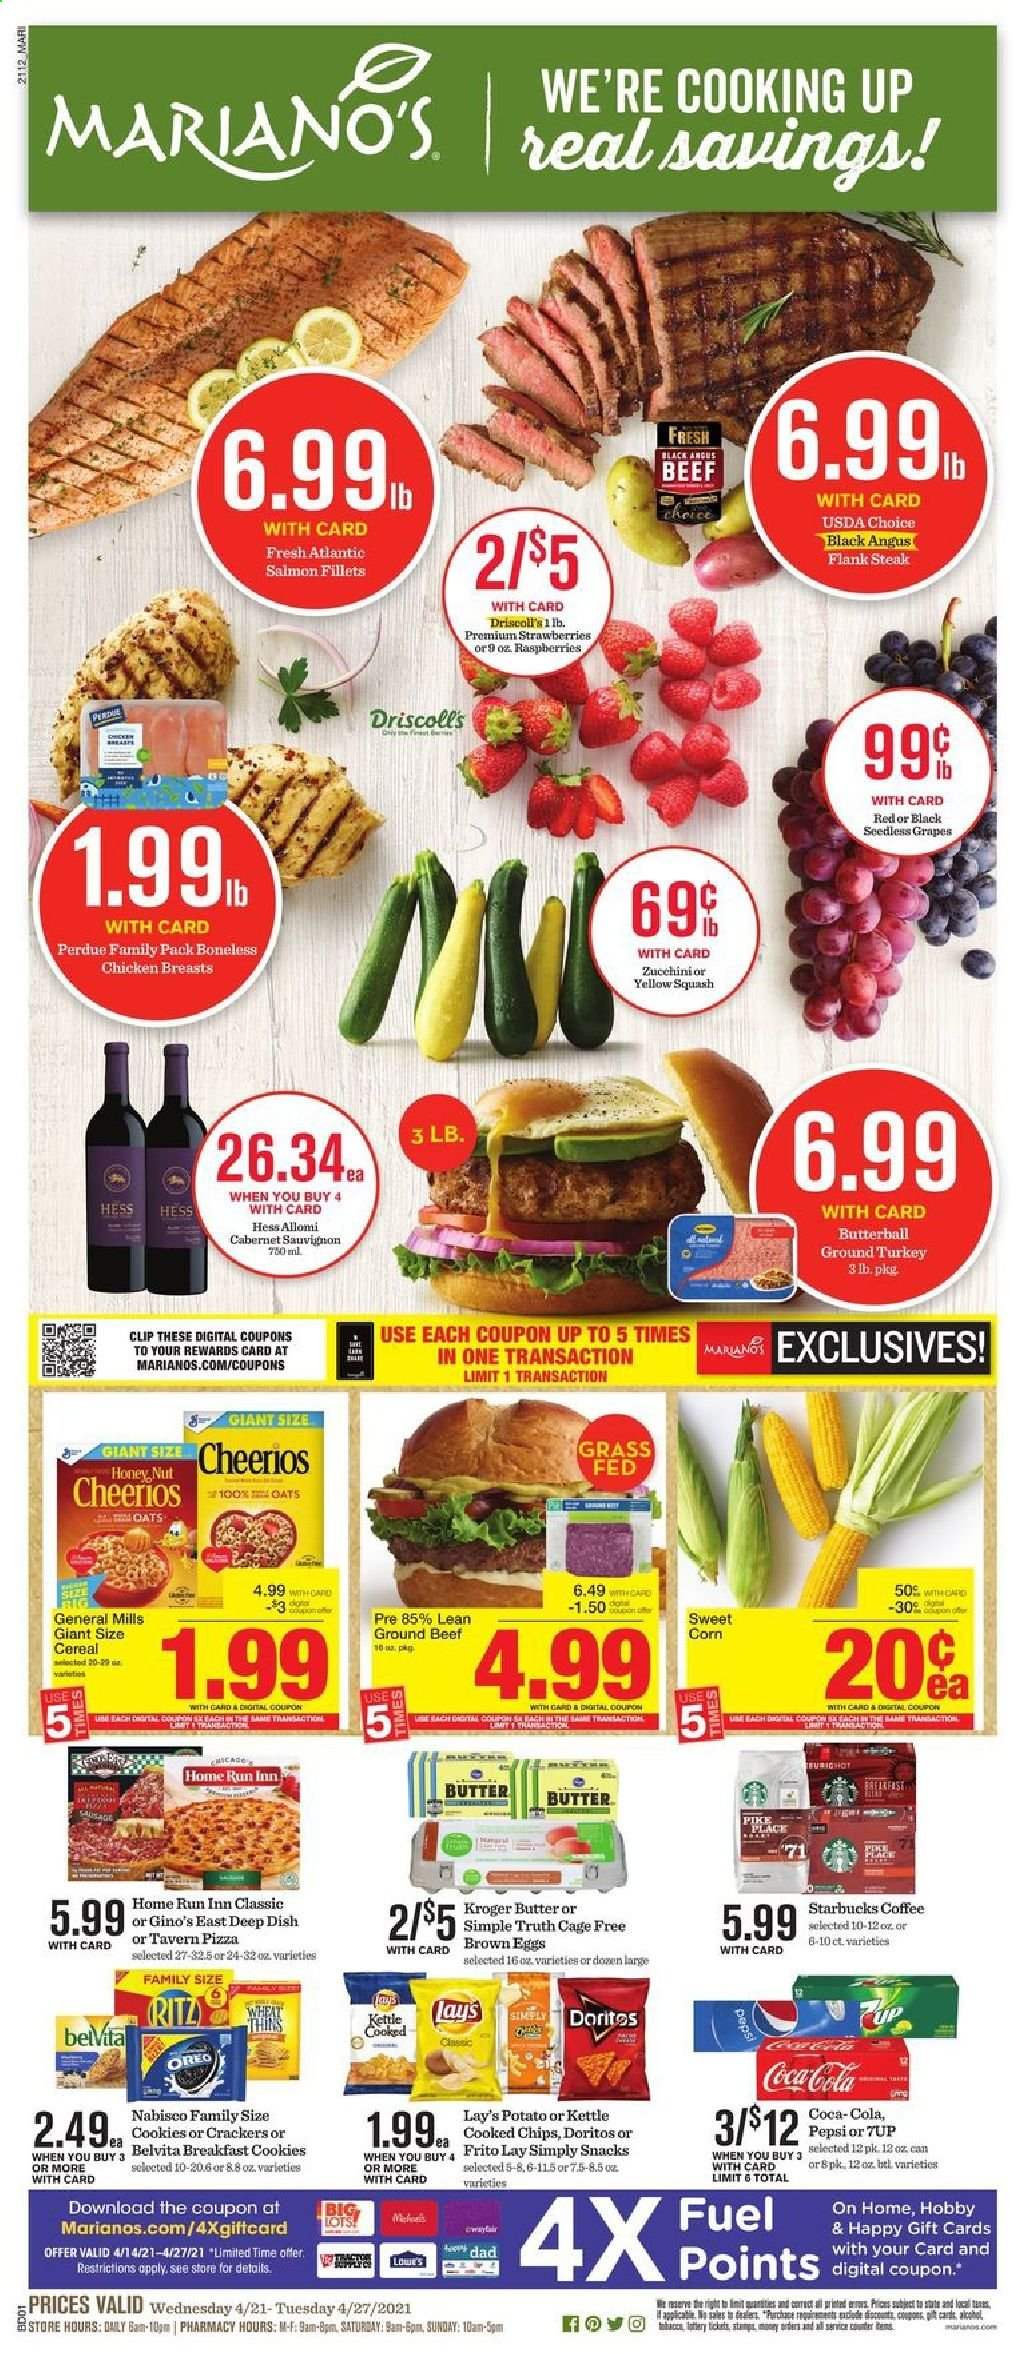 thumbnail - Mariano’s Flyer - 04/21/2021 - 04/27/2021 - Sales products - seedless grapes, corn, sweet corn, yellow squash, grapes, raspberries, strawberries, salmon, salmon fillet, pizza, Perdue®, Butterball, Oreo, eggs, cage free eggs, cookies, snack, crackers, RITZ, Doritos, chips, Lay’s, oats, cereals, Cheerios, belVita, Coca-Cola, Pepsi, 7UP, coffee, Starbucks, Cabernet Sauvignon, red wine, wine, ground turkey, chicken breasts, beef meat, ground beef, steak, flank steak. Page 1.